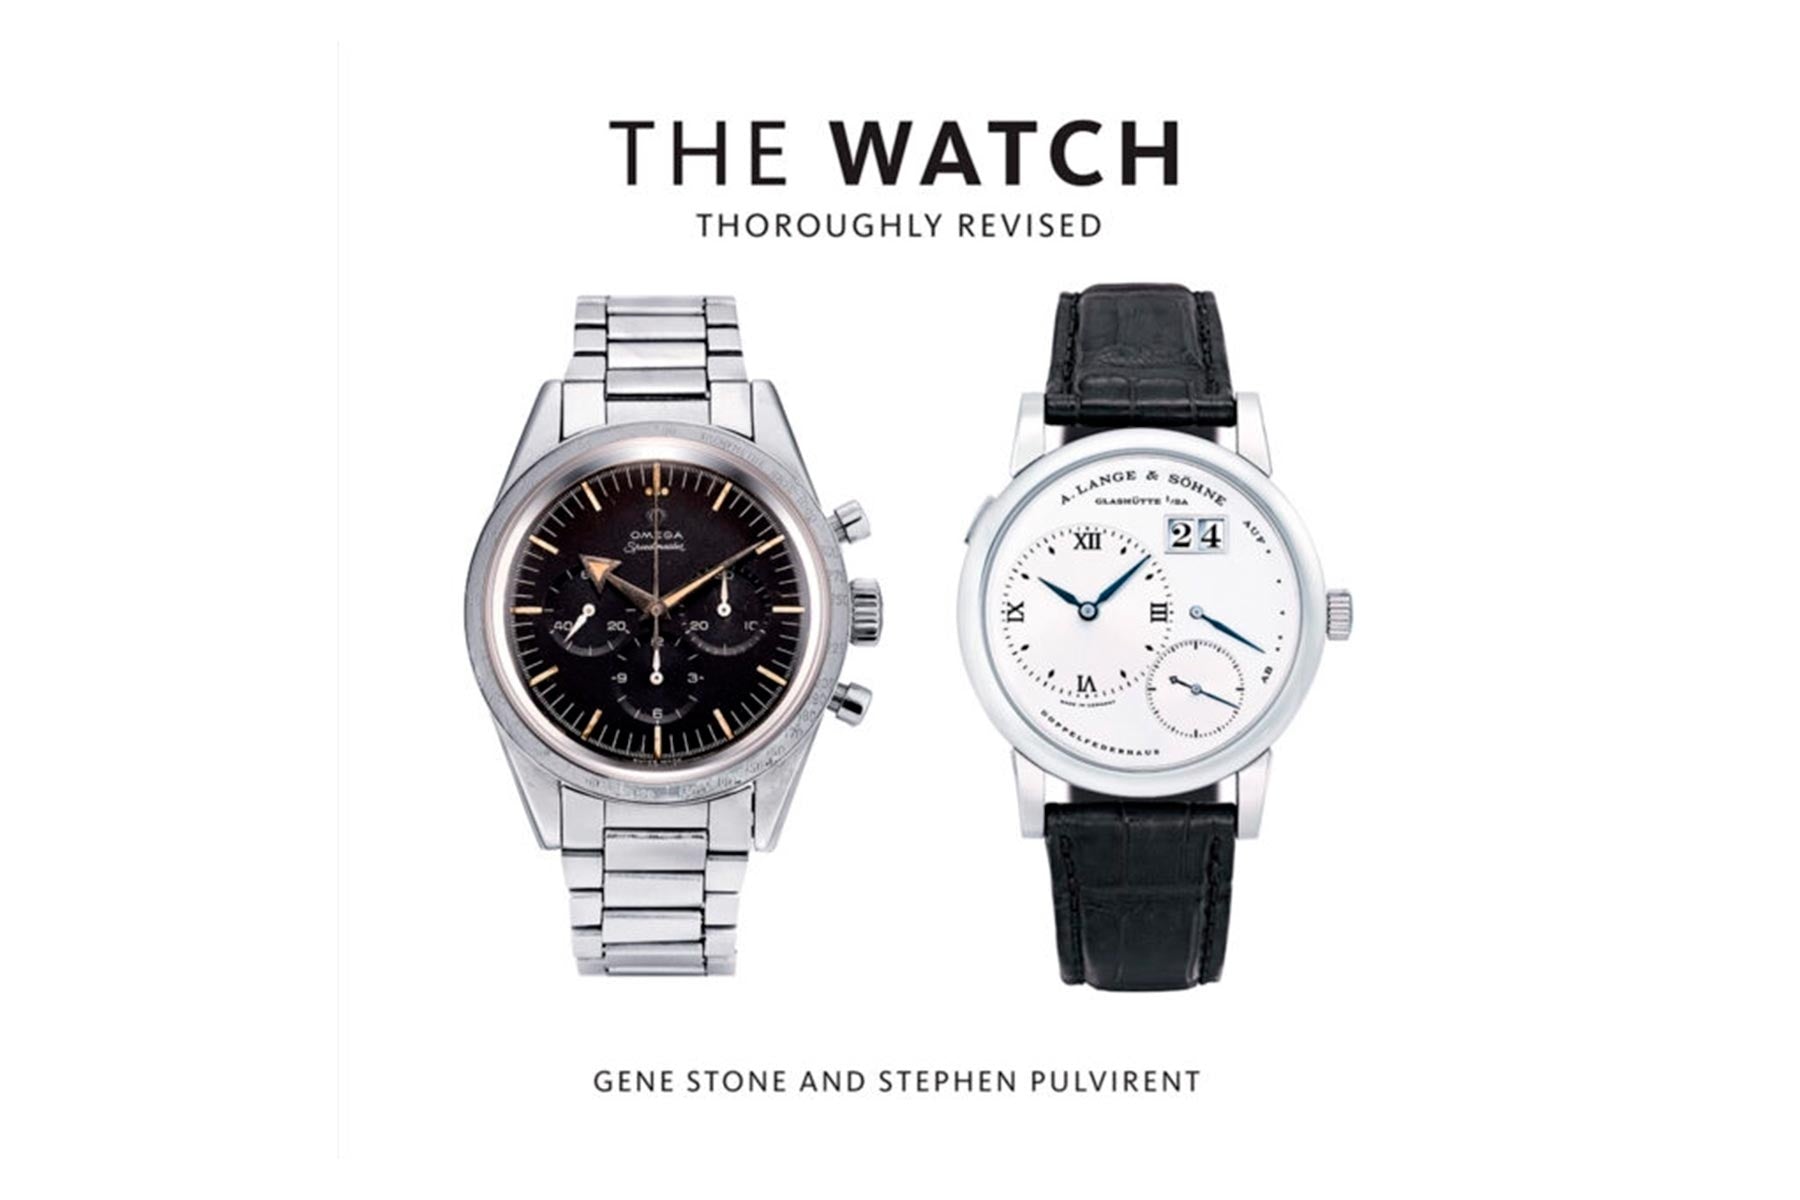 The Watch – Thoroughly Revised